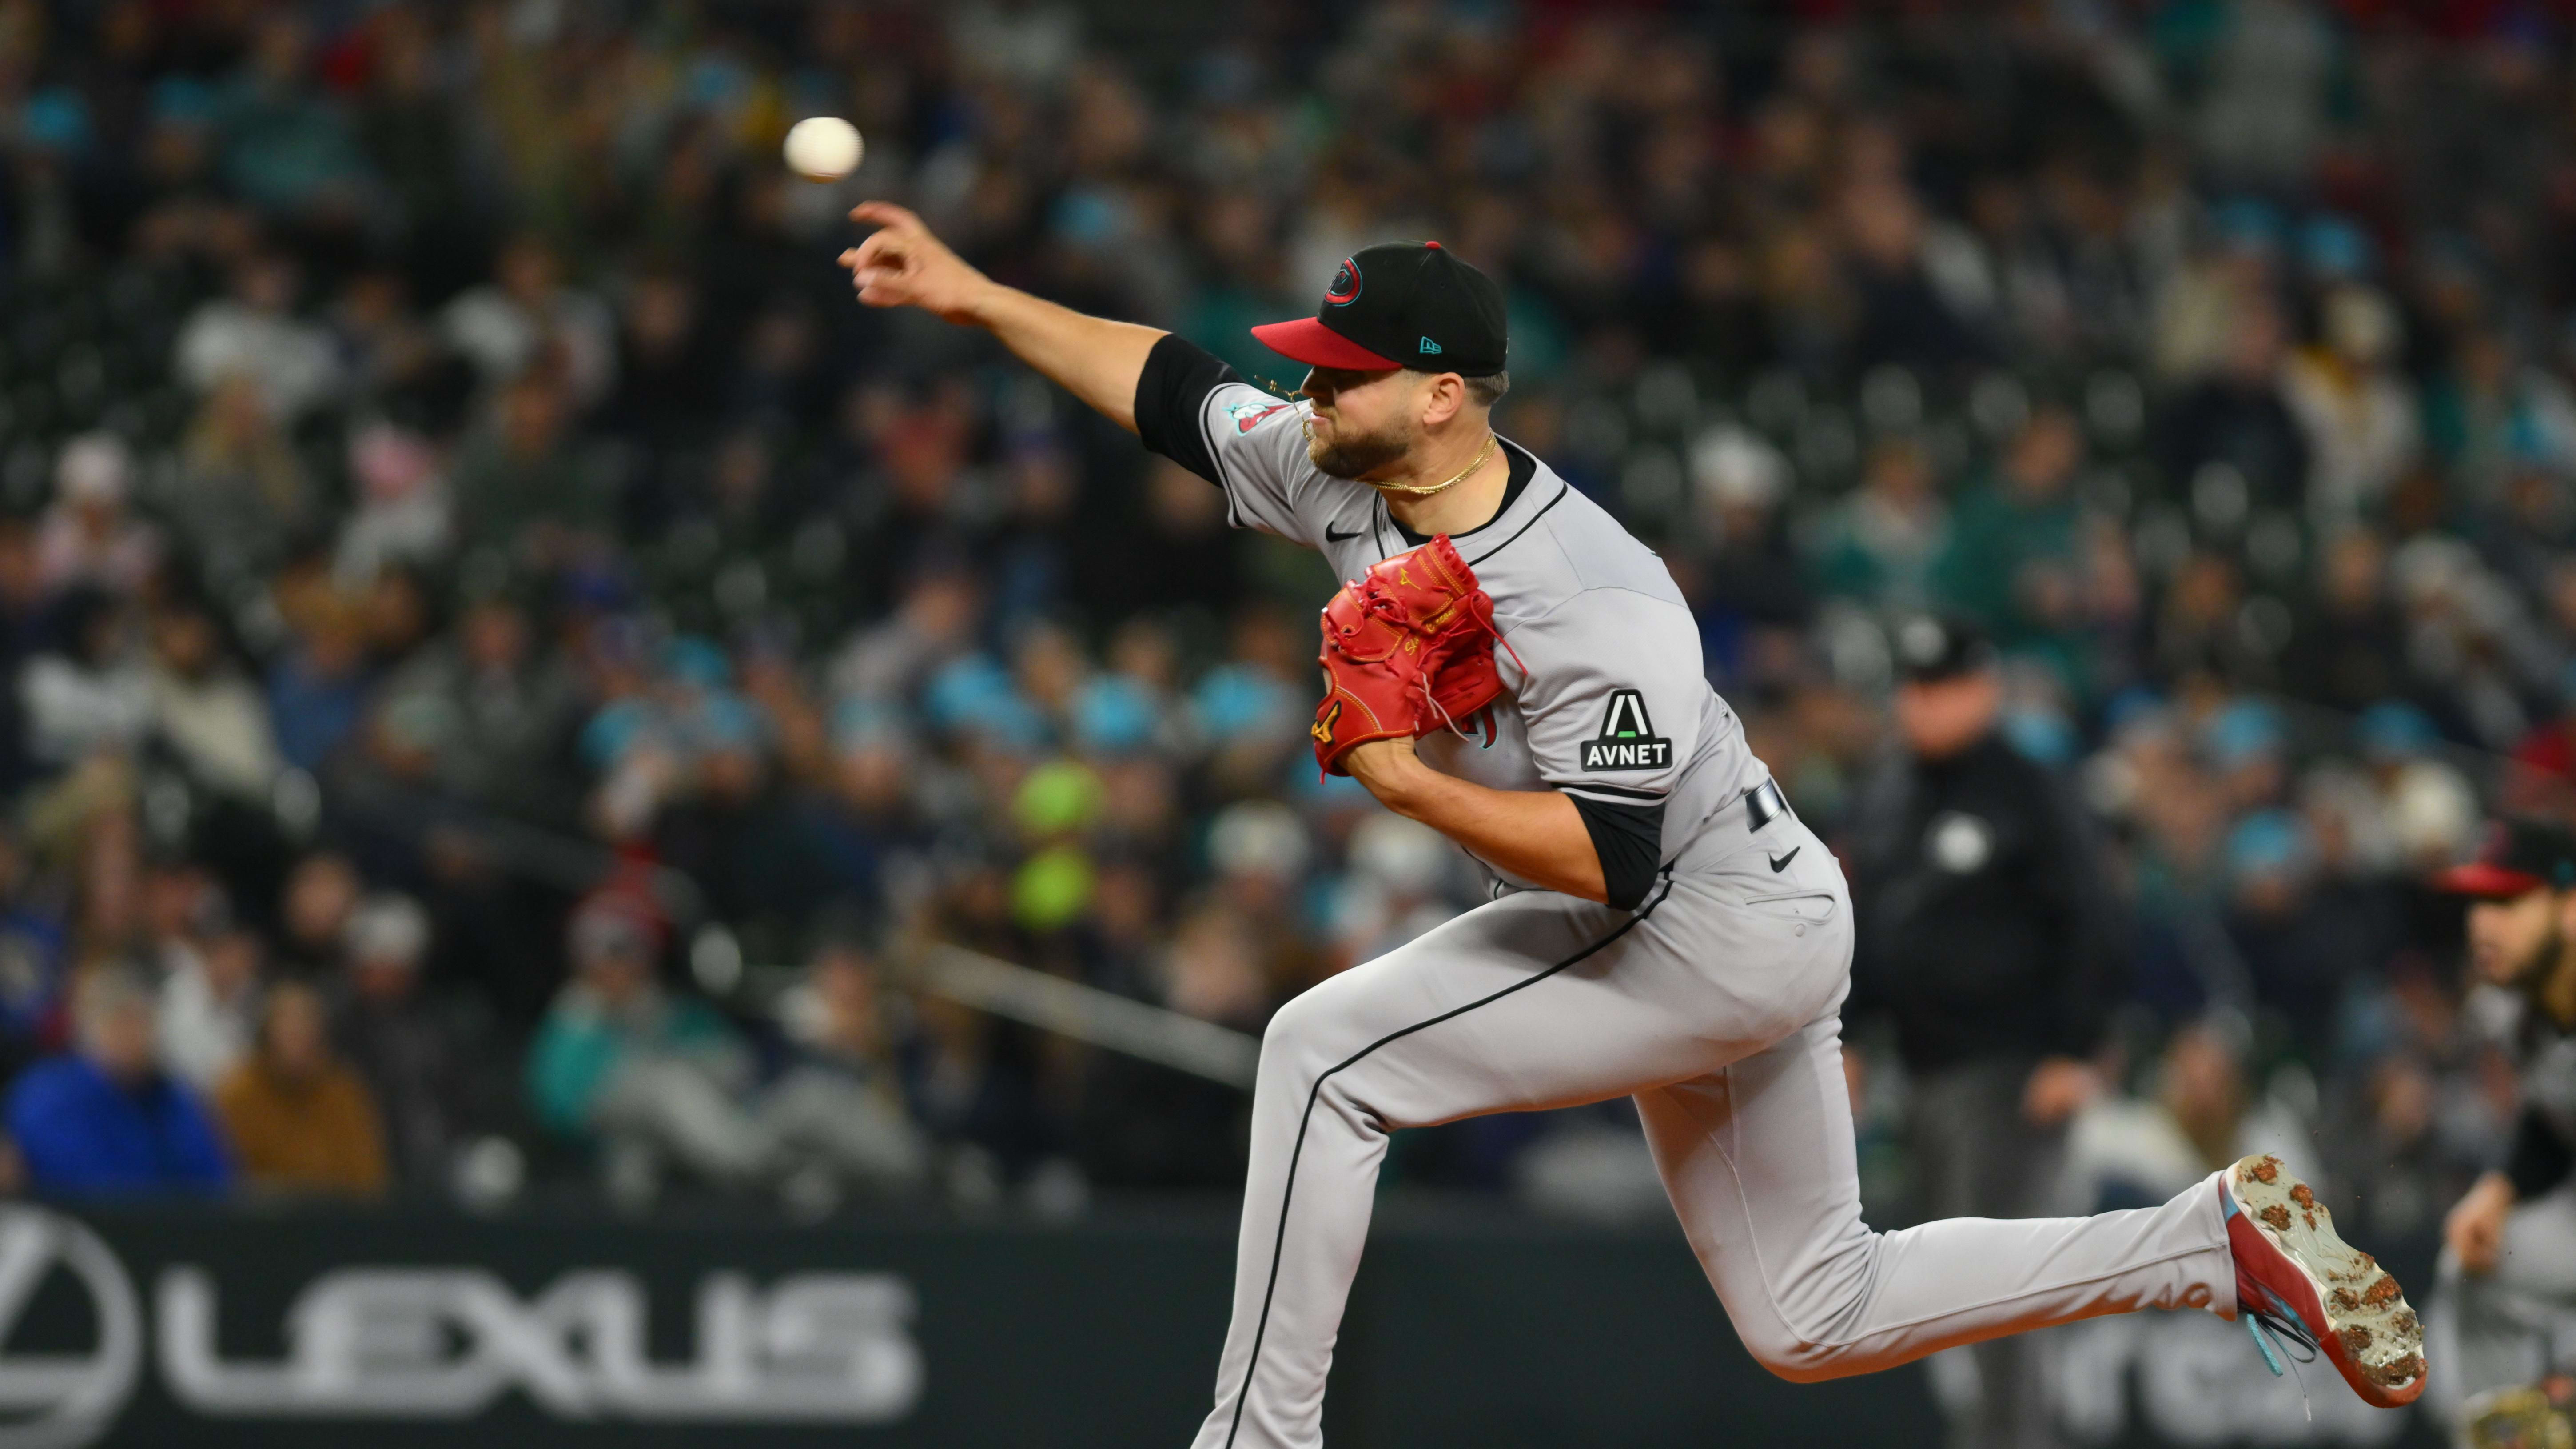 Arizona Diamondbacks starting pitcher Slade Cecconi pitches against the Seattle Mariners at T-Mobile Park.